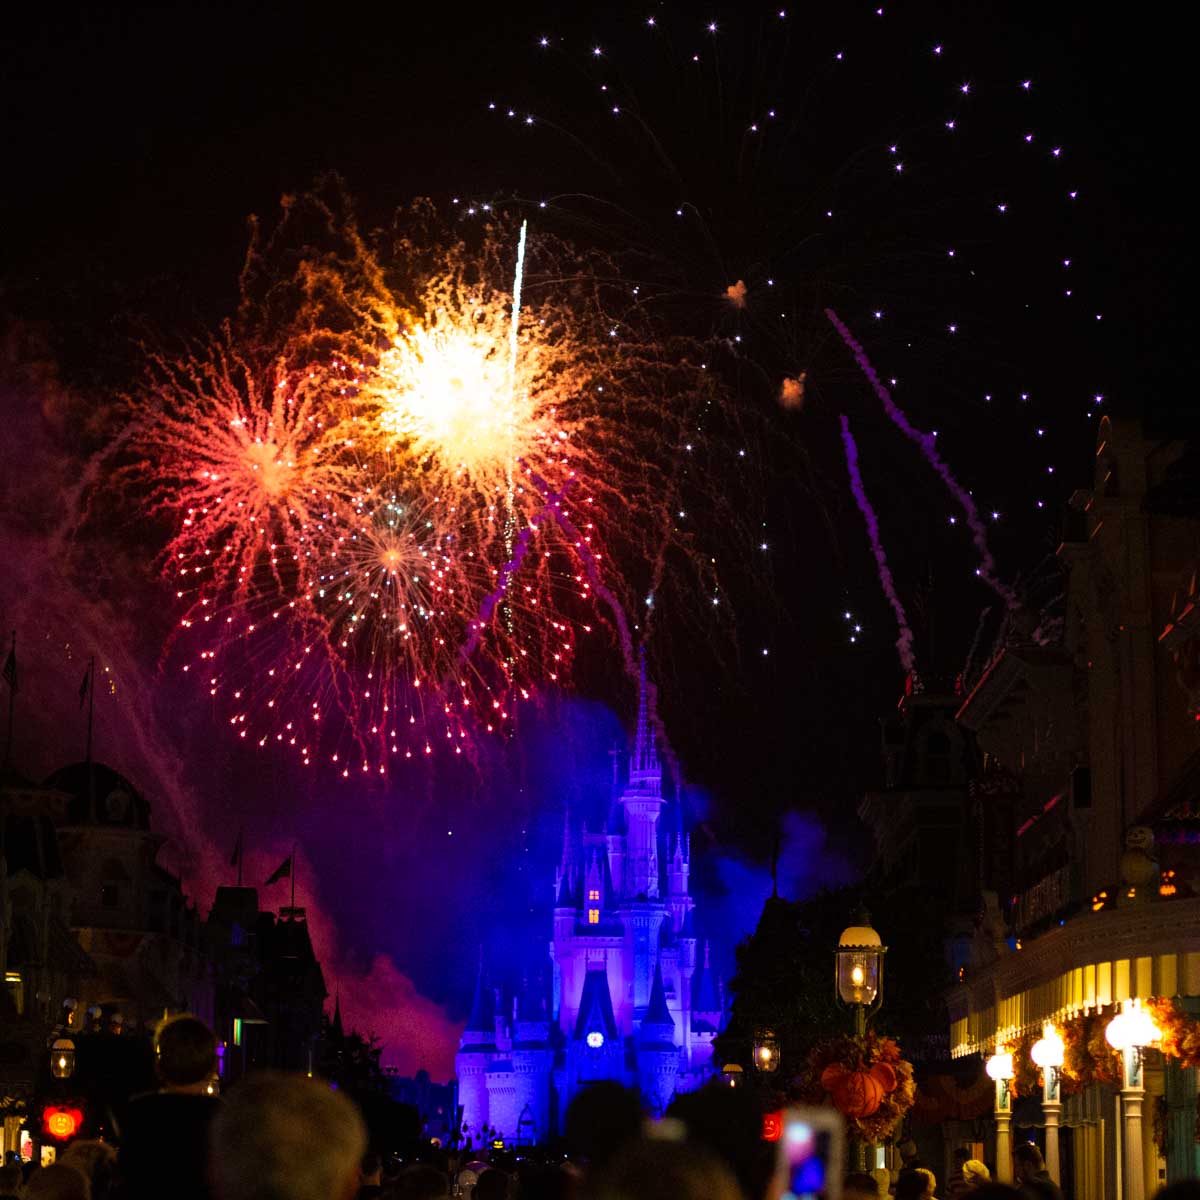 Fireworks are going off above Cinderella's Castle in Magic Kingdom.